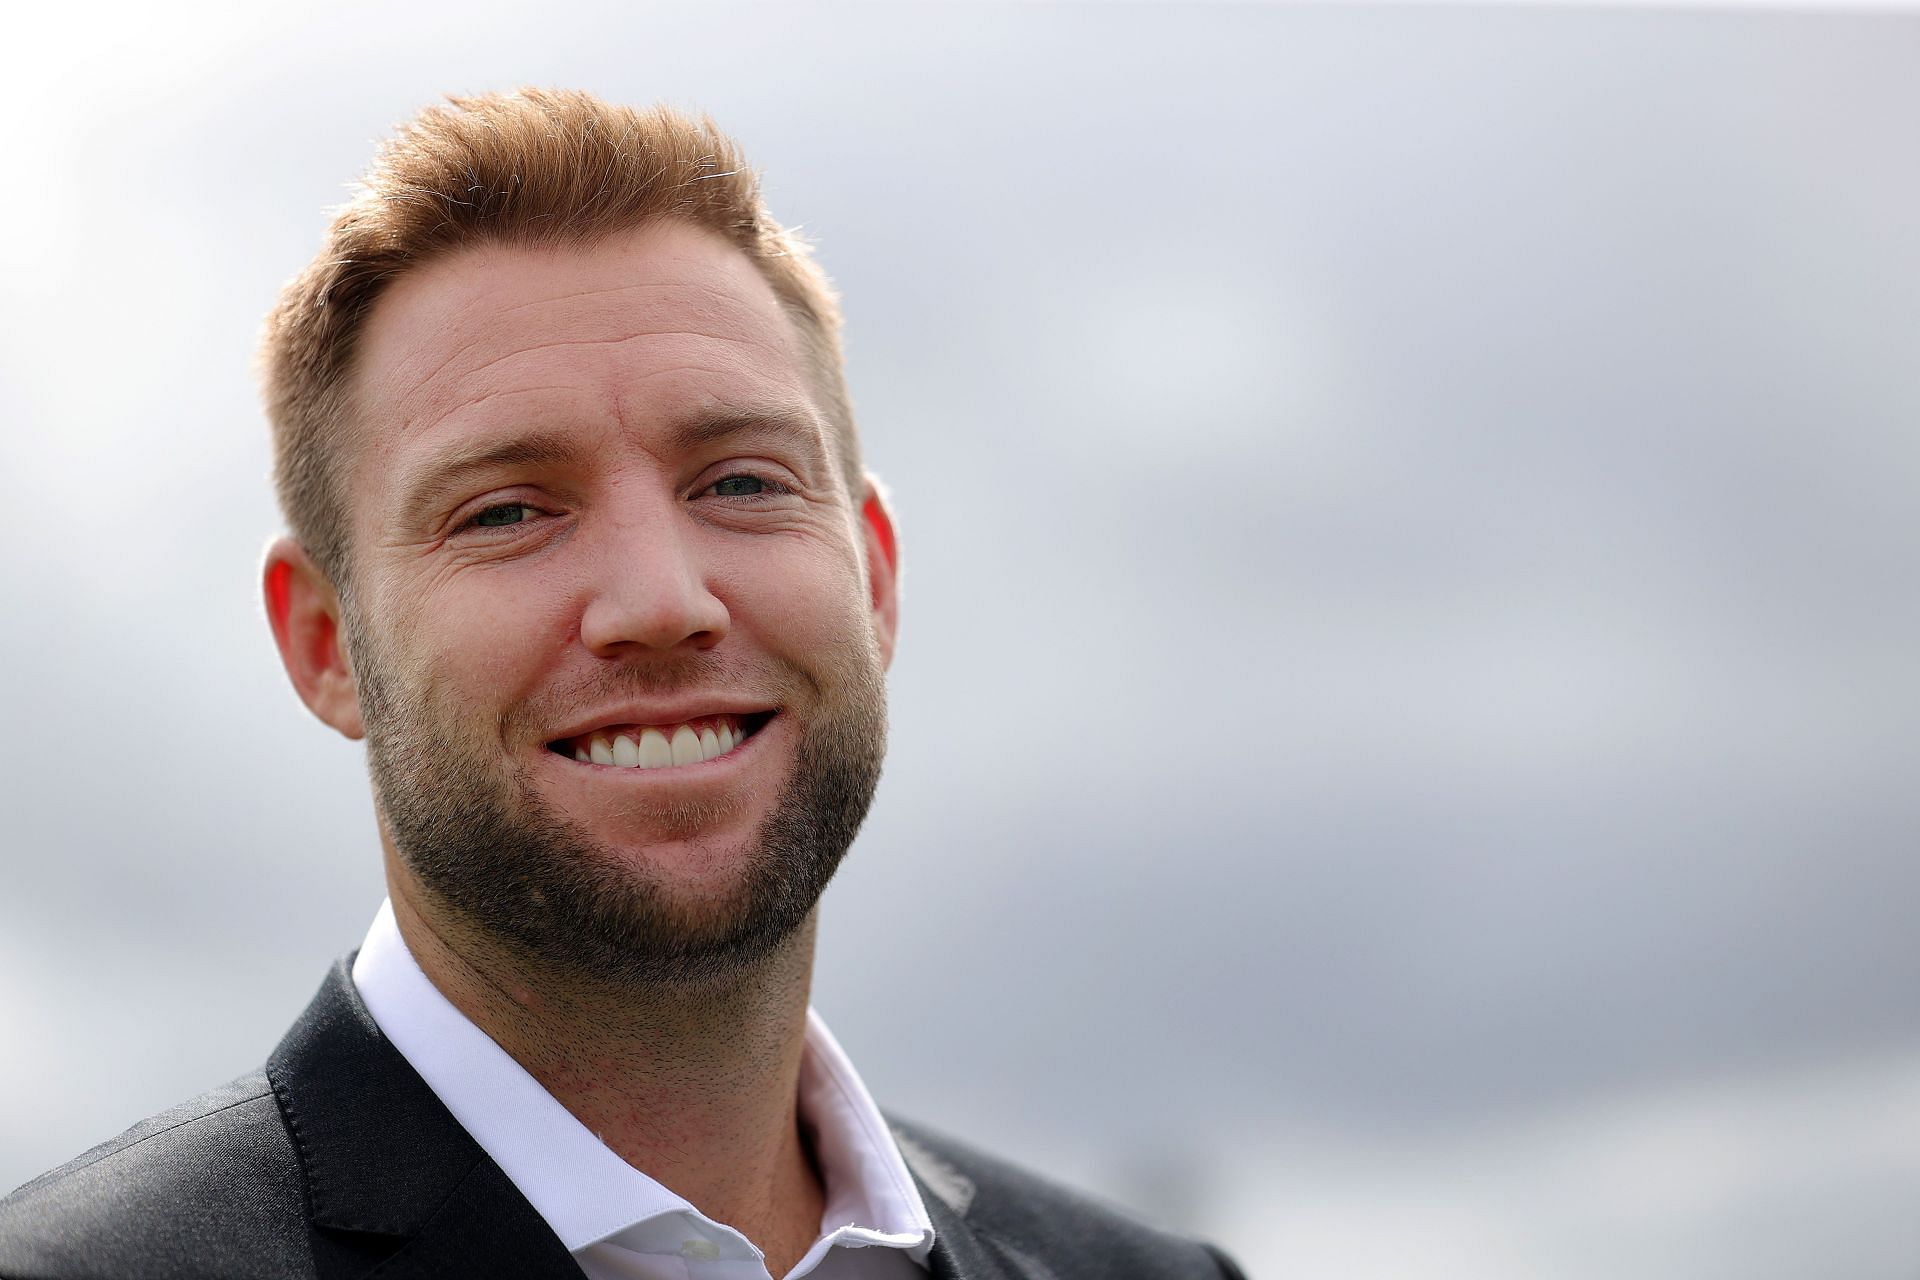 Jack Sock at a media photoshoot ahead of Laver Cup 2021.